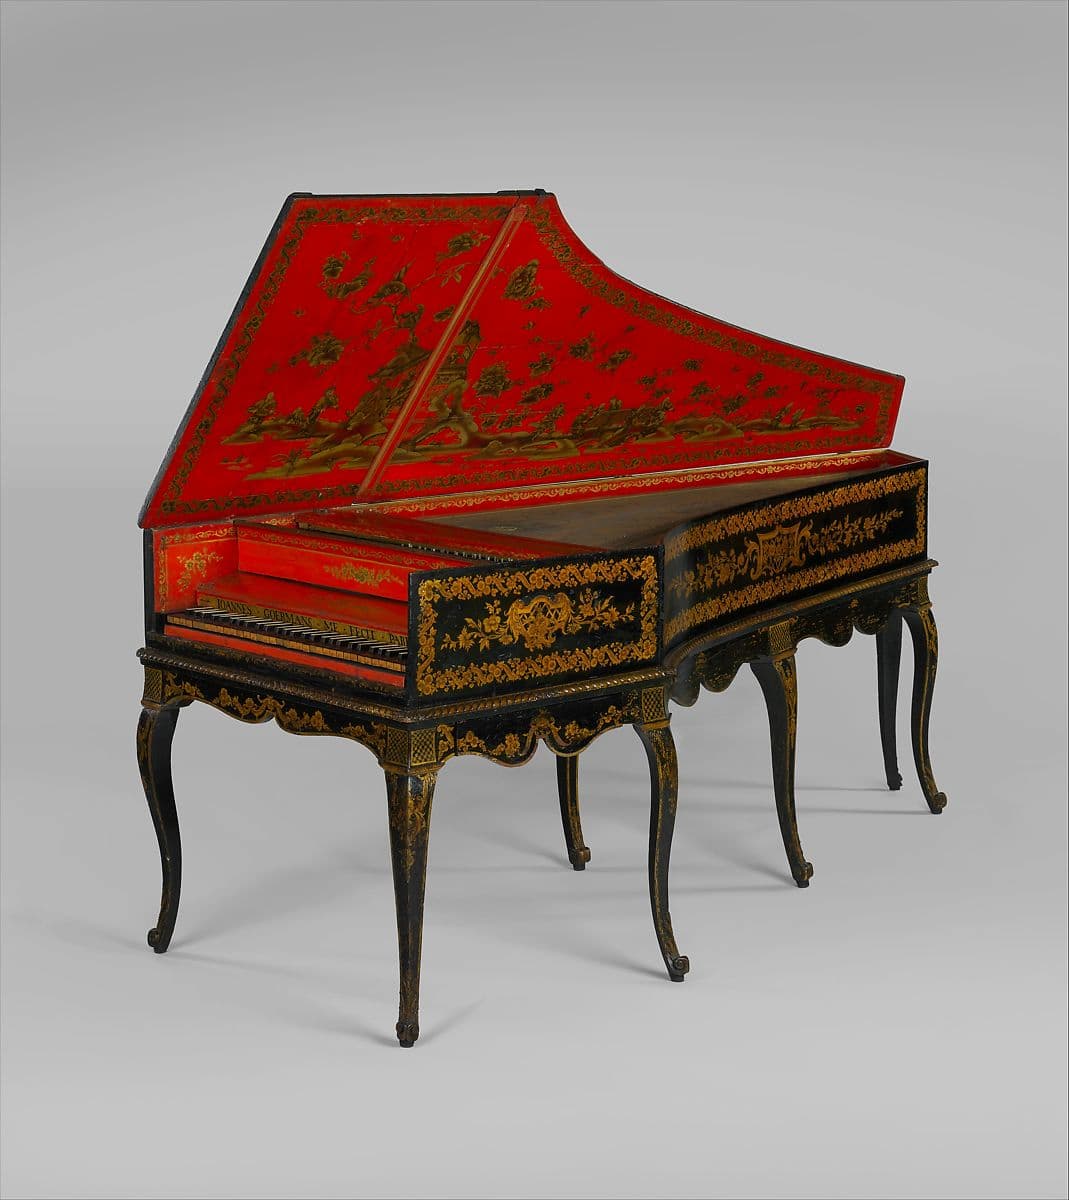 Harpsichord, Ioannes Goermans, 1754, with later piano conversion (Metropolitan Museum of Art)